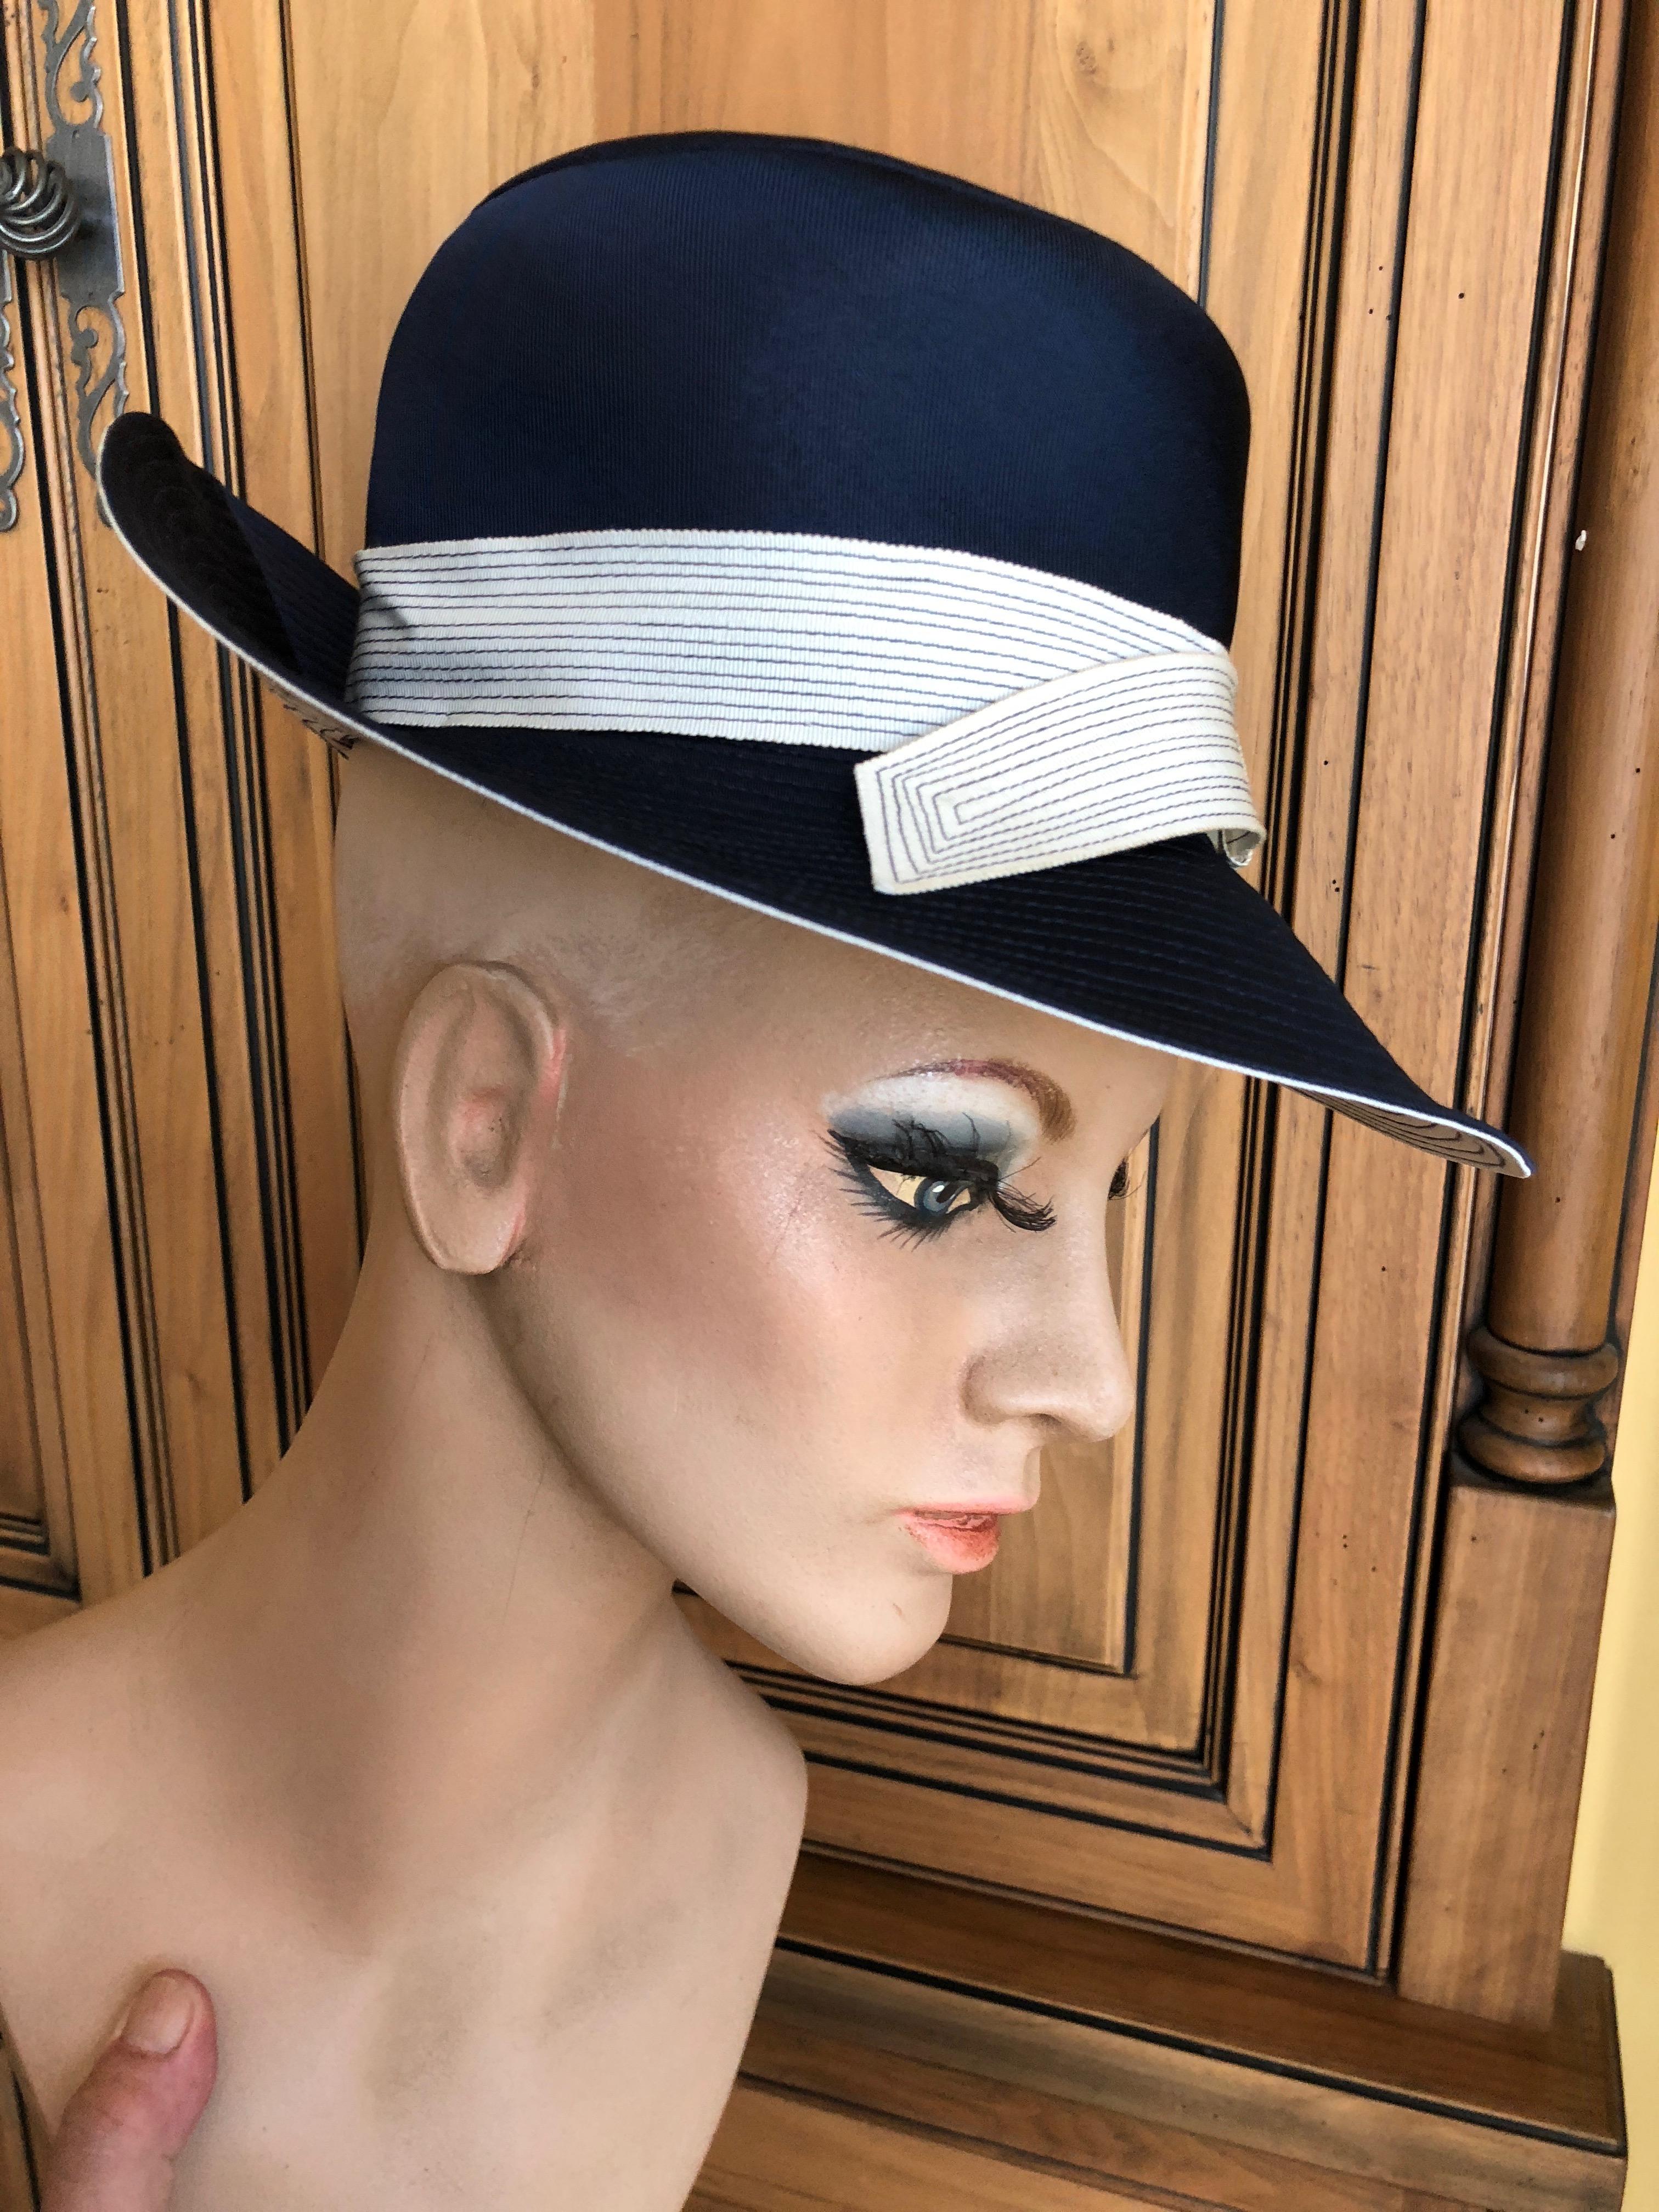 Lilly Daché Dachettes for I. Magnin 1960 Deadstock Navy and Cream Fedora Hat In New Condition For Sale In Cloverdale, CA